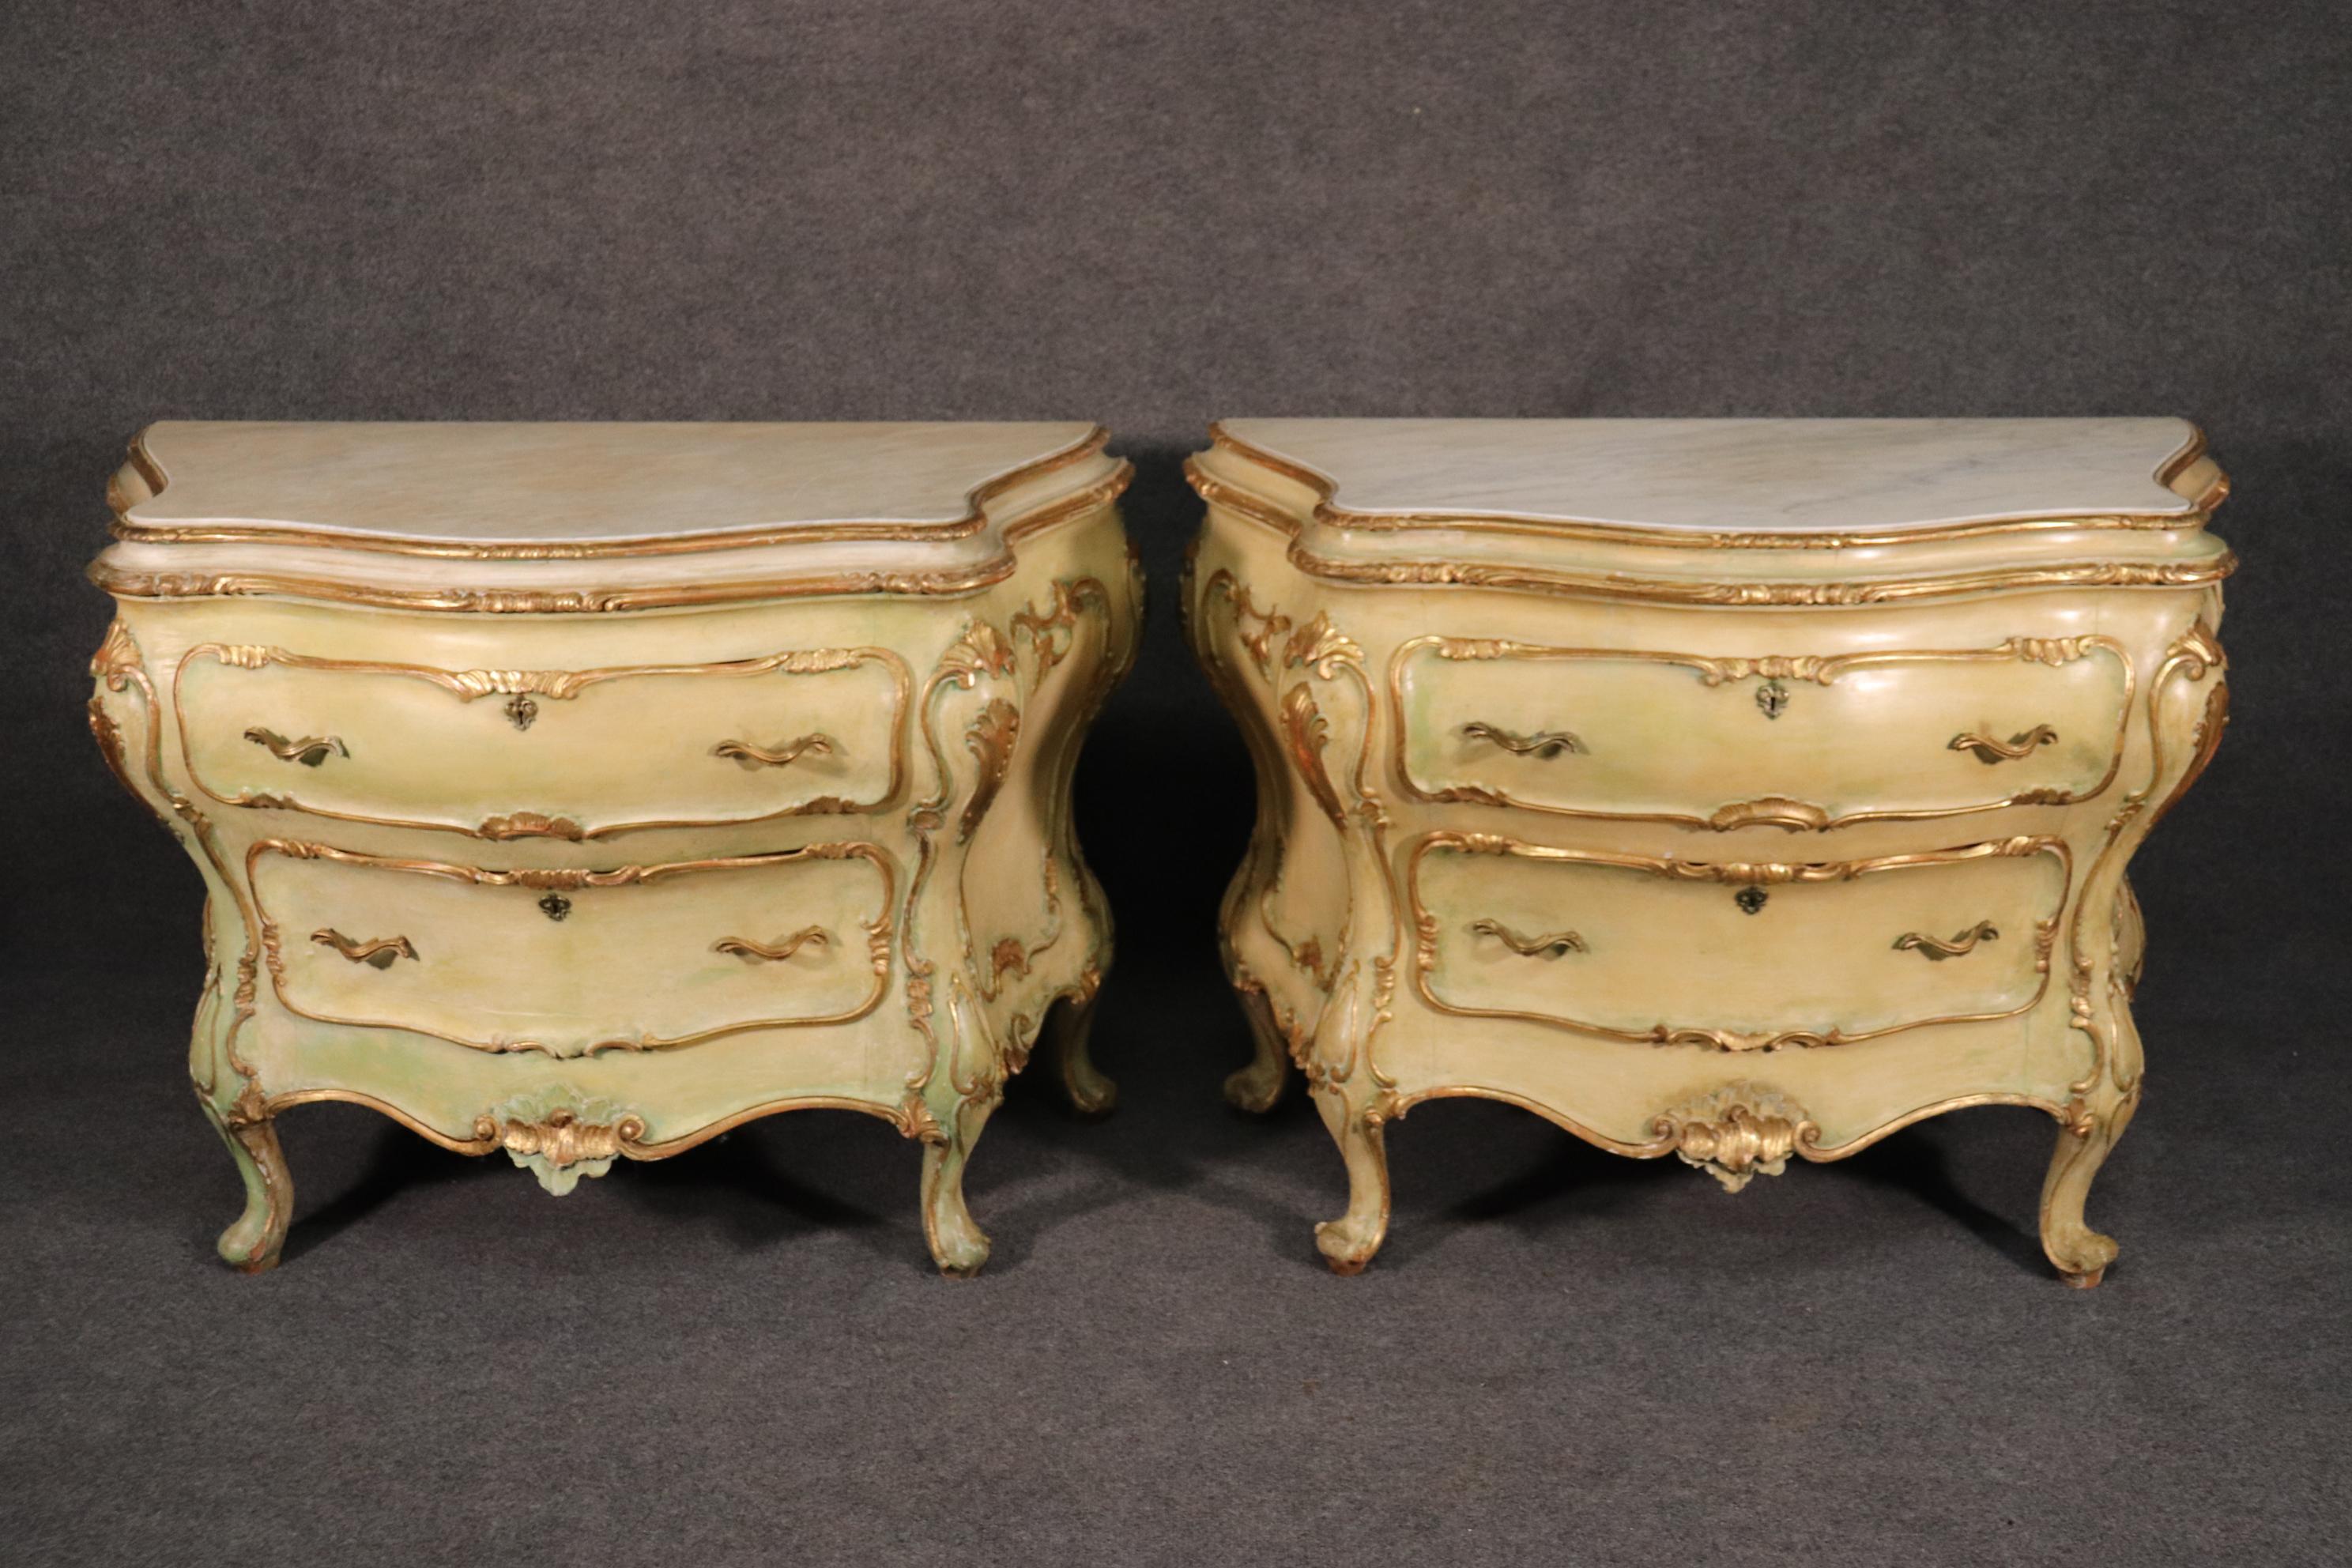 This is a fine and rare pair of Italian made rococo commodes. The commodes date to the 1930s and have a soft crème painted finish with gilded highlights. The design, styling and execution of these pieces are very well done. They measure: 46 wide x